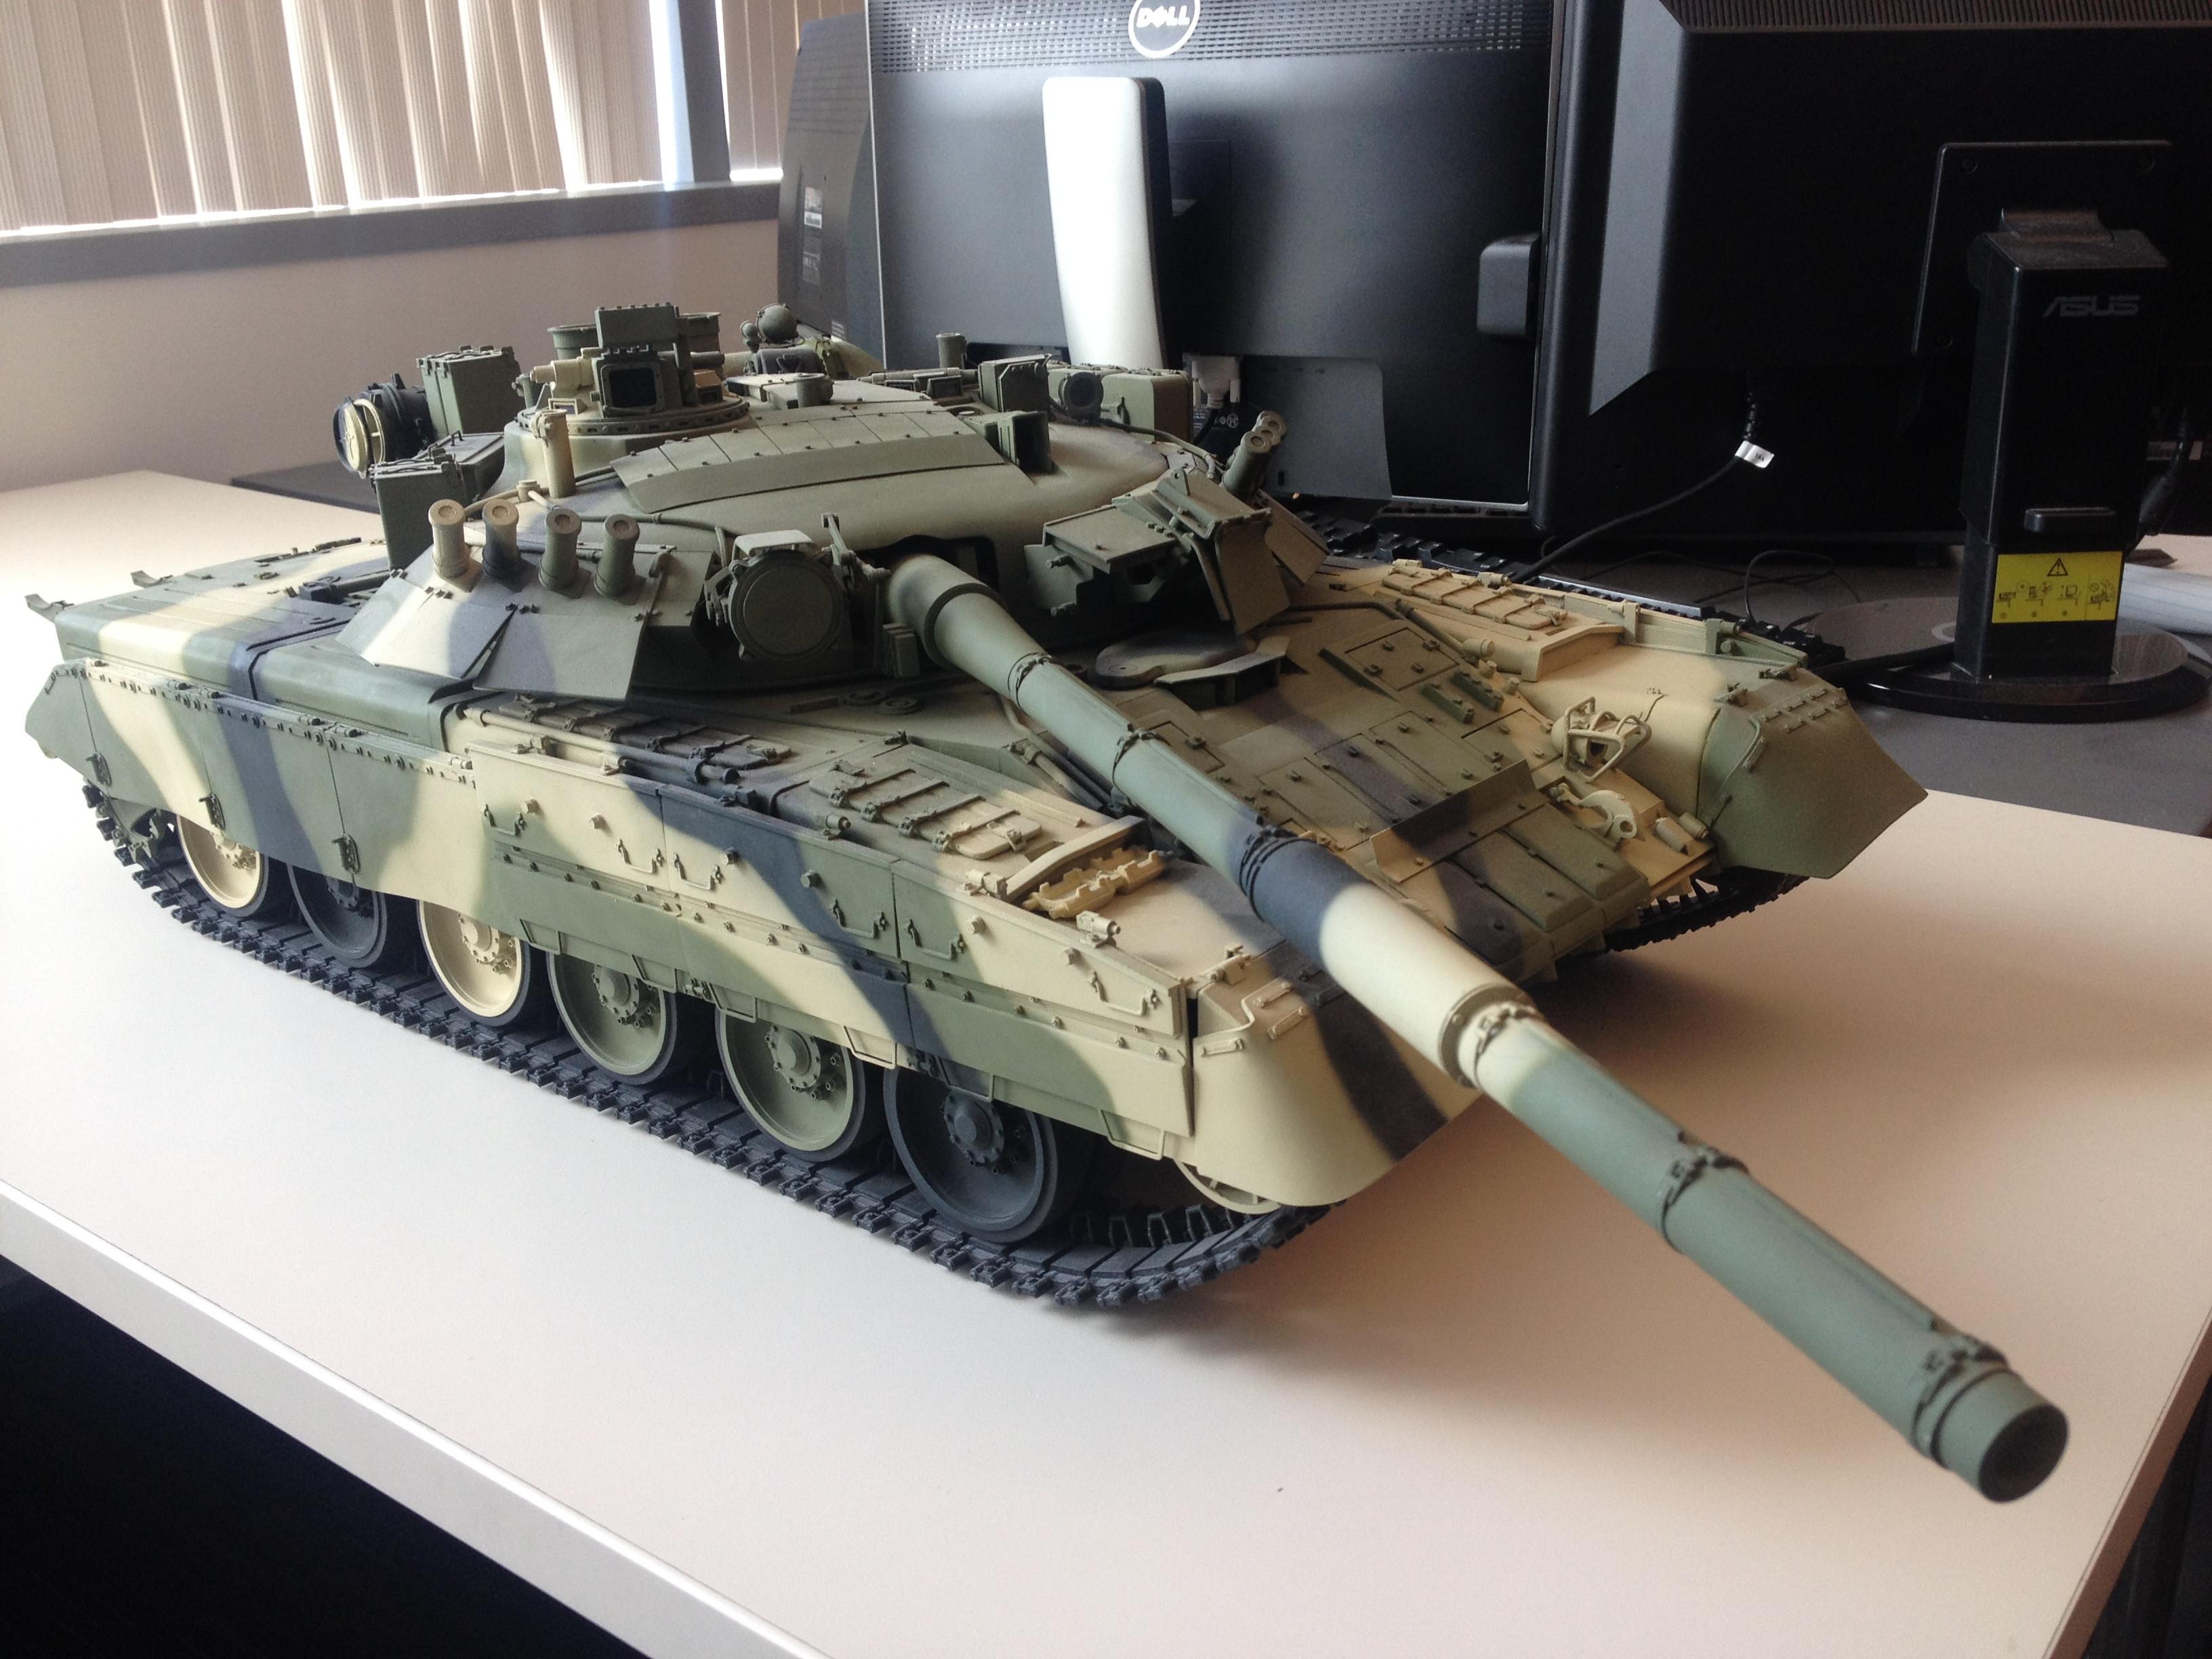 3d Printing Meets Model Building With This Amazing T80 Russian